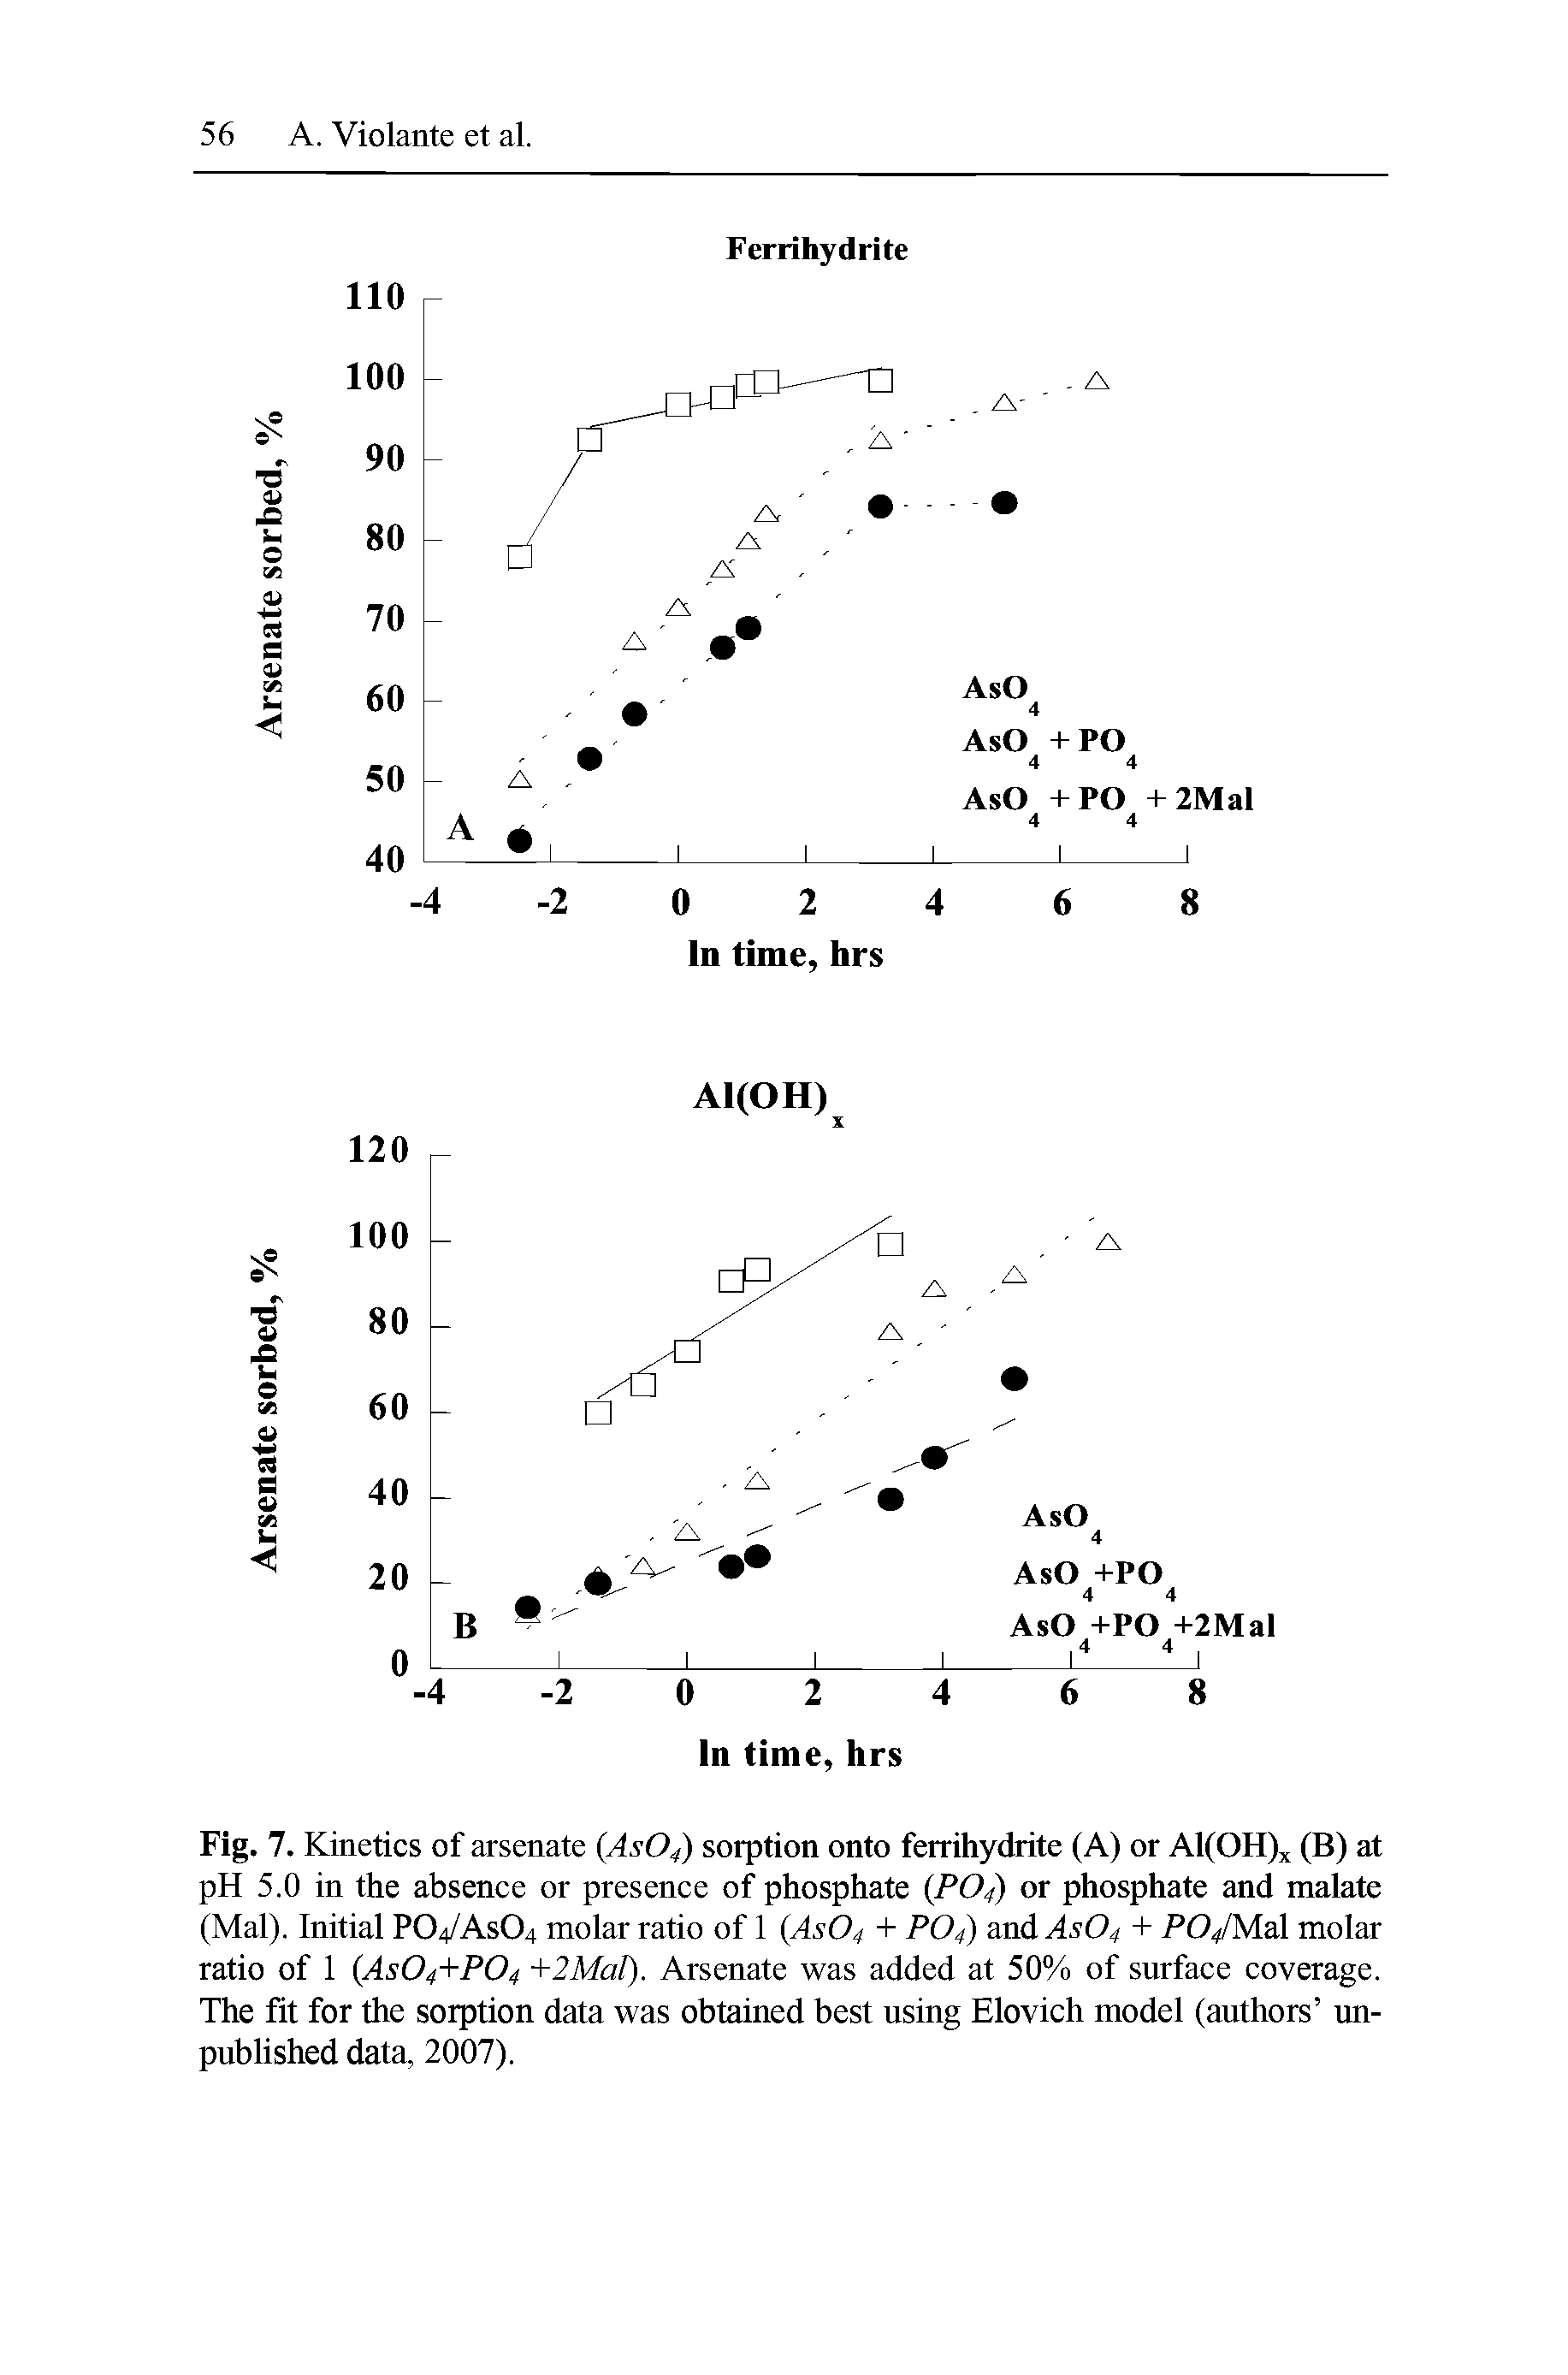 Fig. 7. Kinetics of arsenate (AsO,) sorption onto ferrihydrite (A) or Al(OH)x (B) at pH 5.0 in the absence or presence of phosphate (P04) or phosphate and malate (Mai). Initial PO4/ASO4 molar ratio of 1 (AsO, + PO,) and AsO, + POyMal molar ratio of 1 (As04+P04 +2Mai). Arsenate was added at 50% of surface coverage. The fit for the sorption data was obtained best using Elovich model (authors unpublished data, 2007).